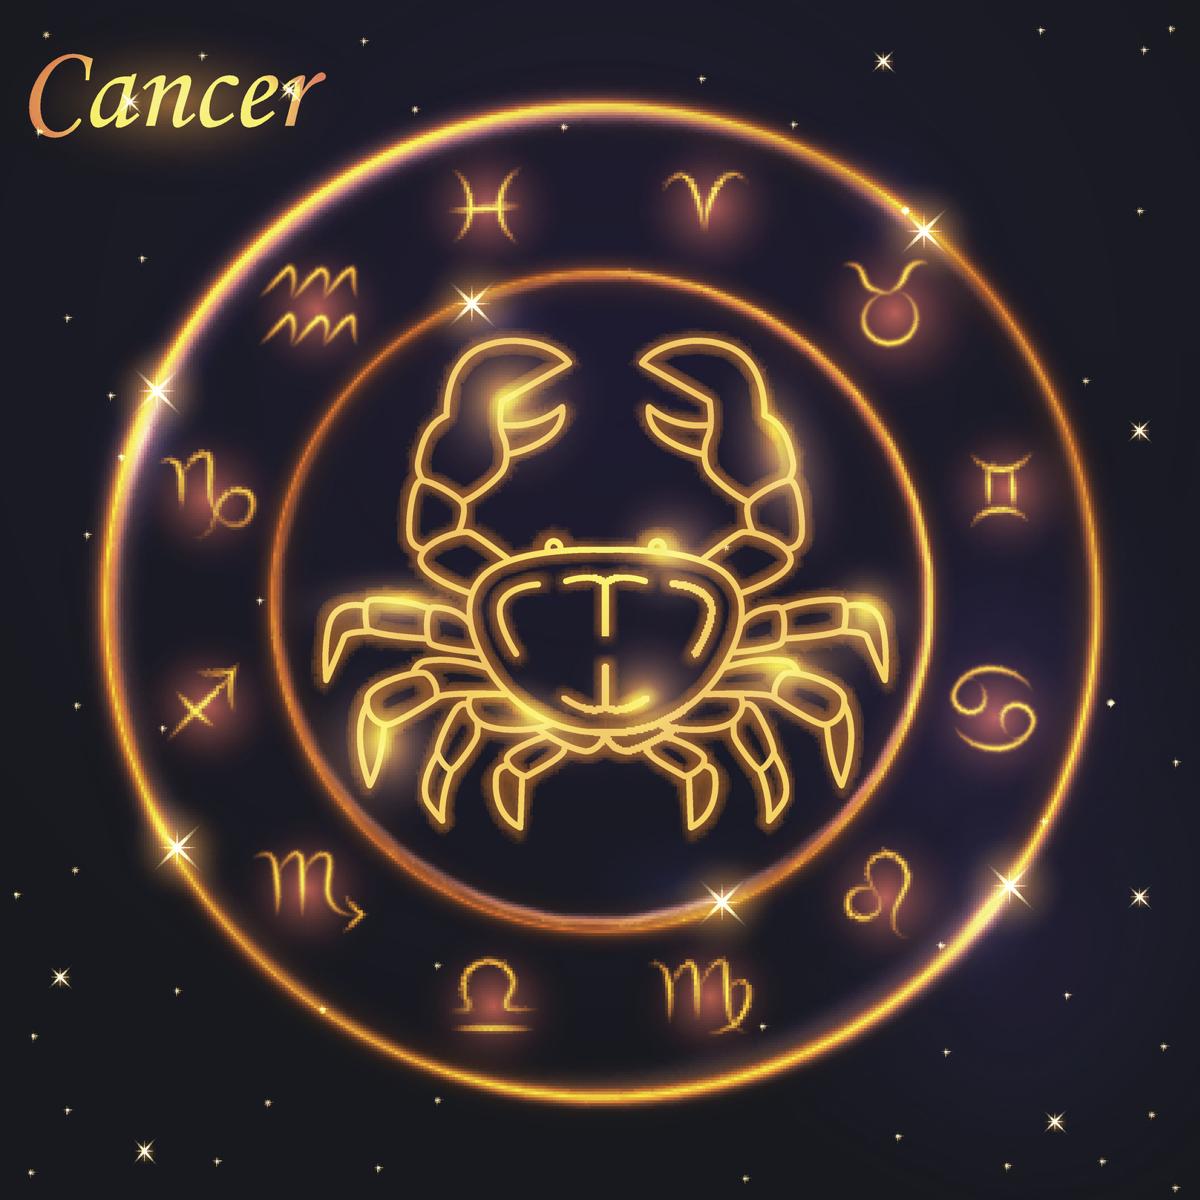 Revealed! Taurus Man and Cancer Woman Relationship Compatibility